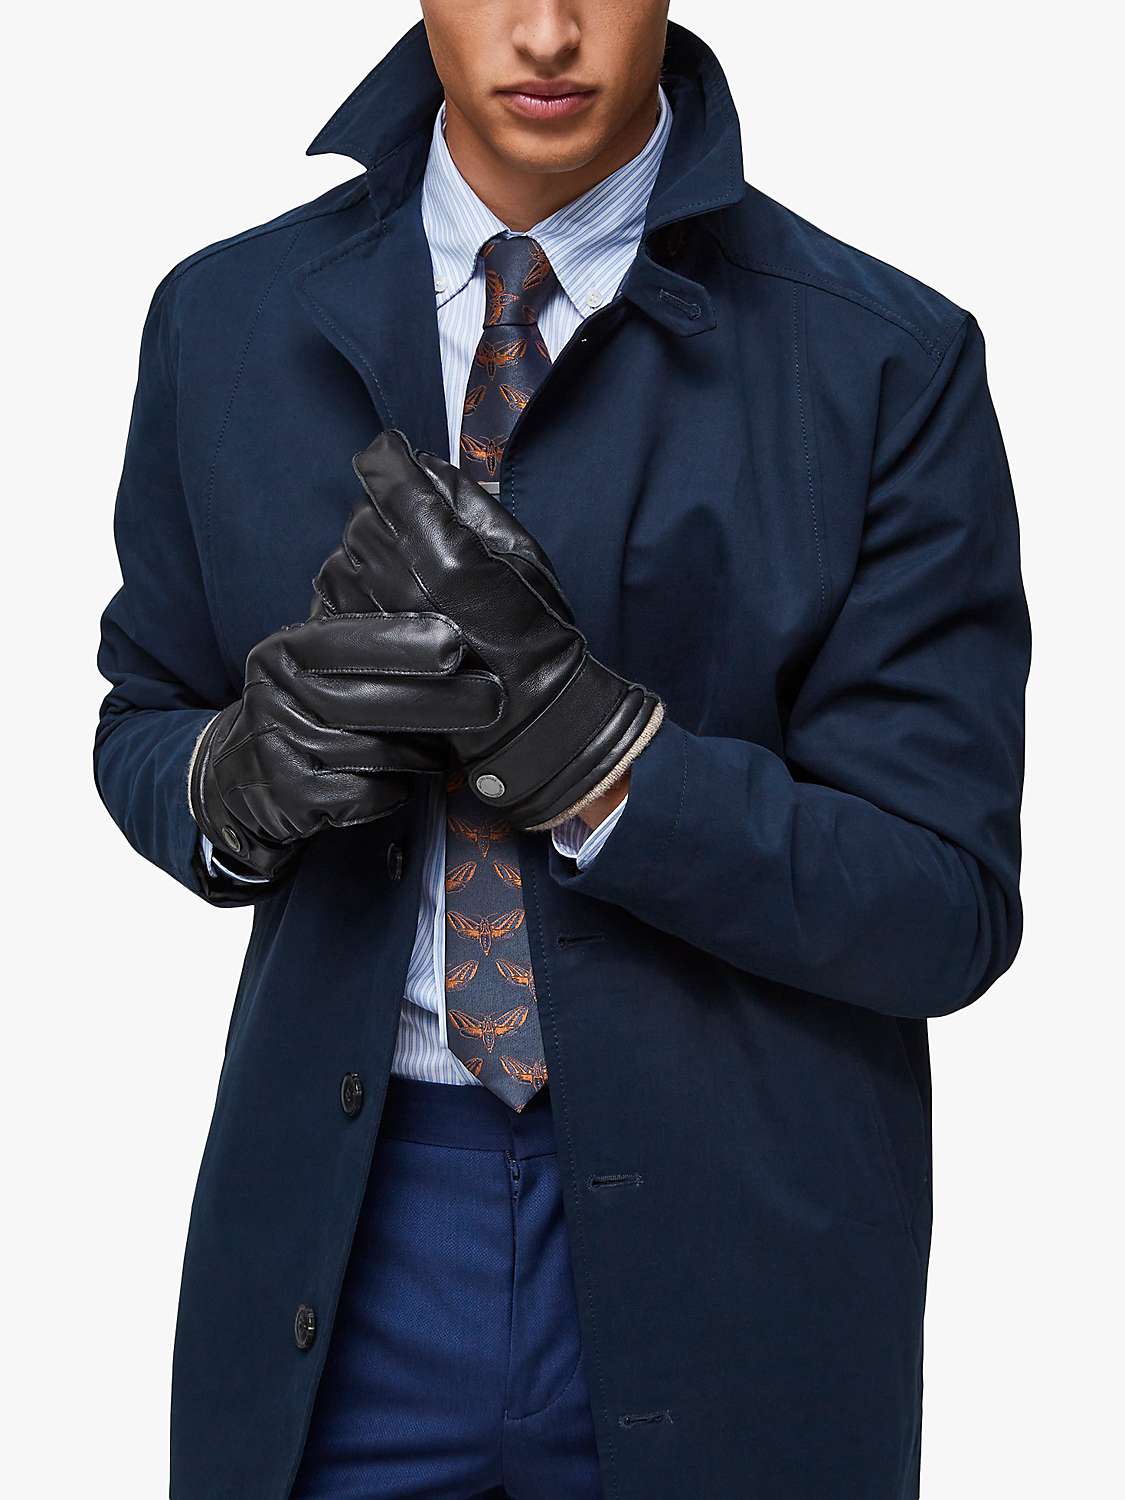 Buy SELECTED HOMME Leather Gloves Online at johnlewis.com